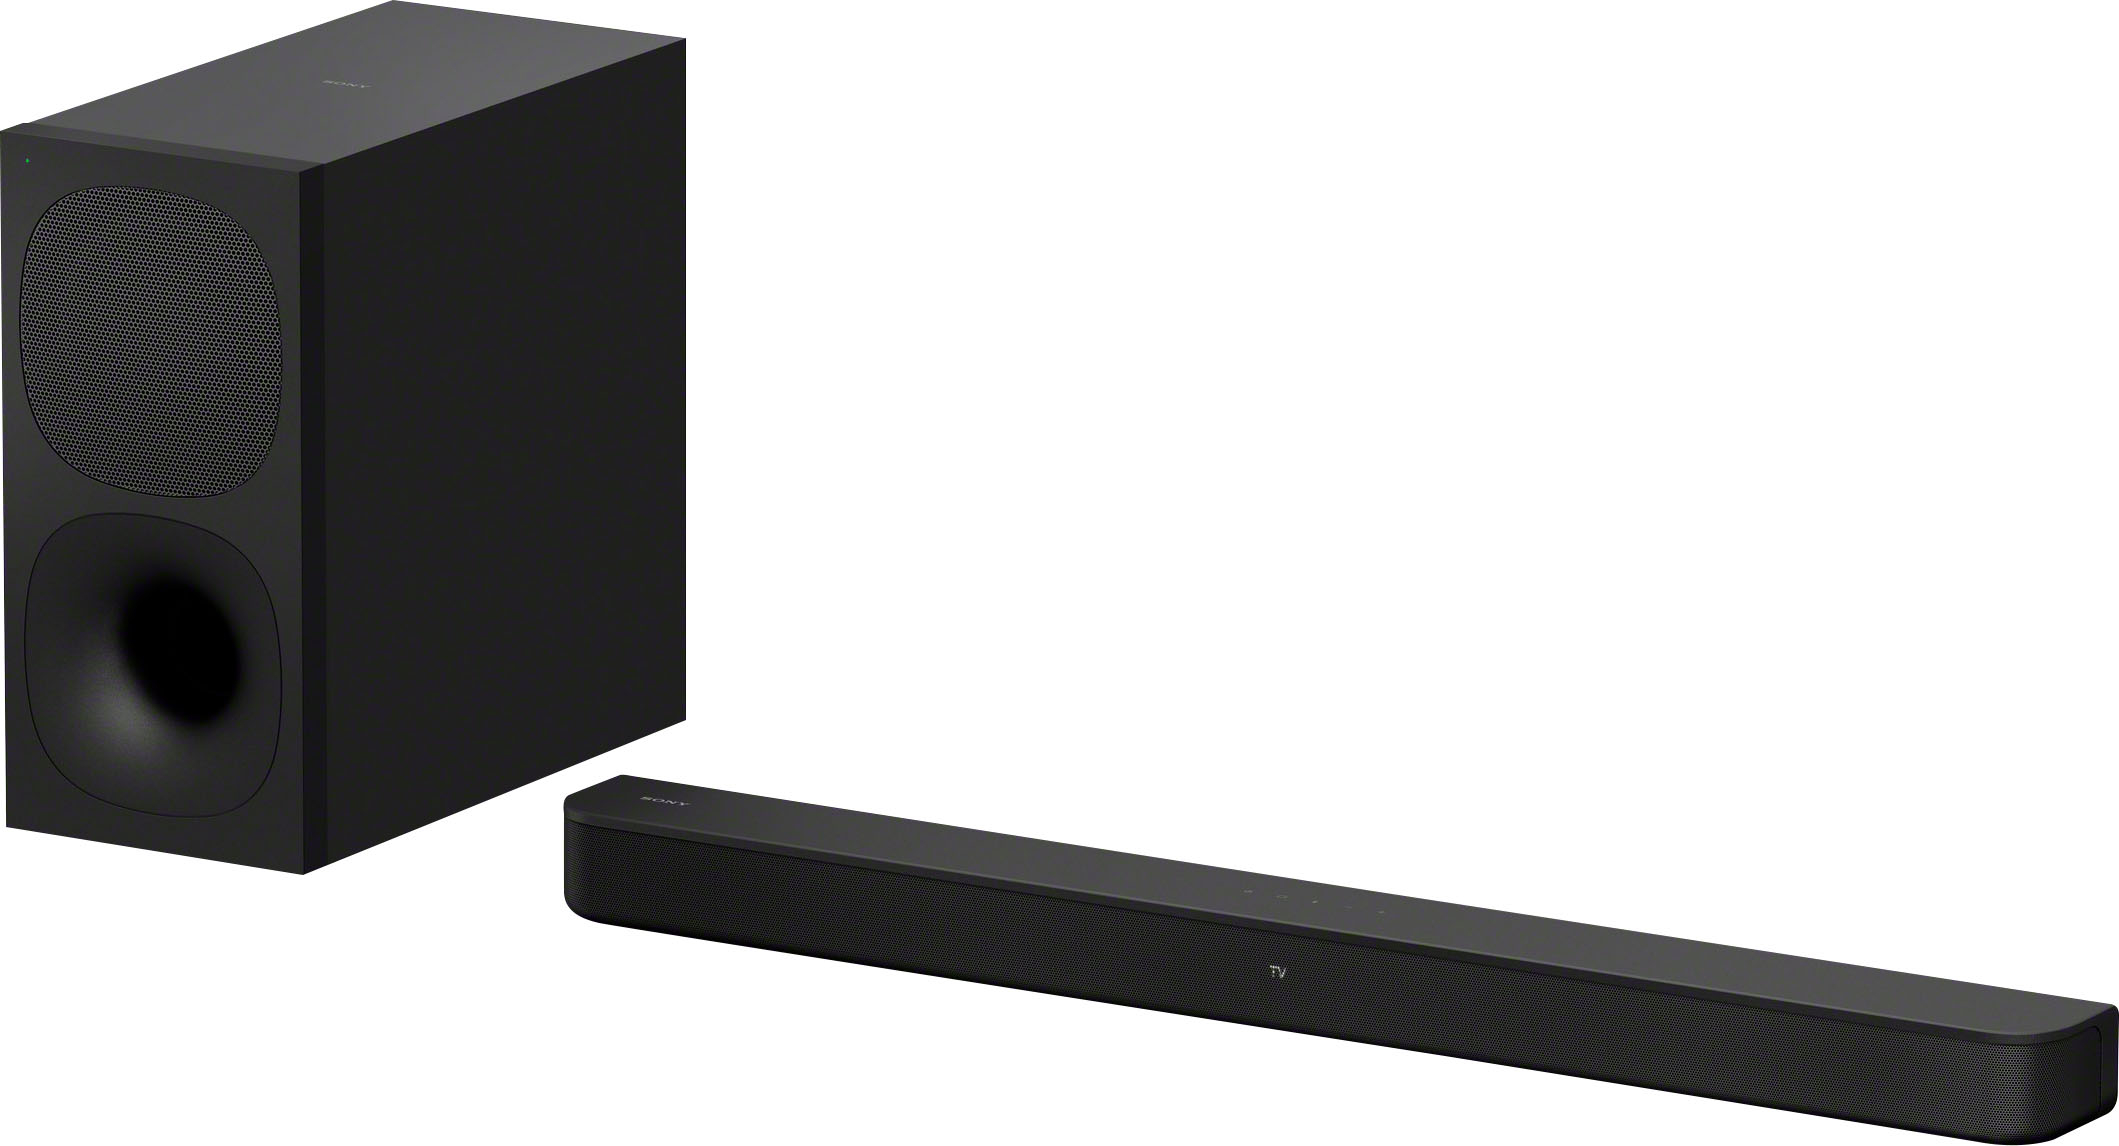 vizio 40 2.1 home theater soundbar with wireless subwoofer review - Best Buy